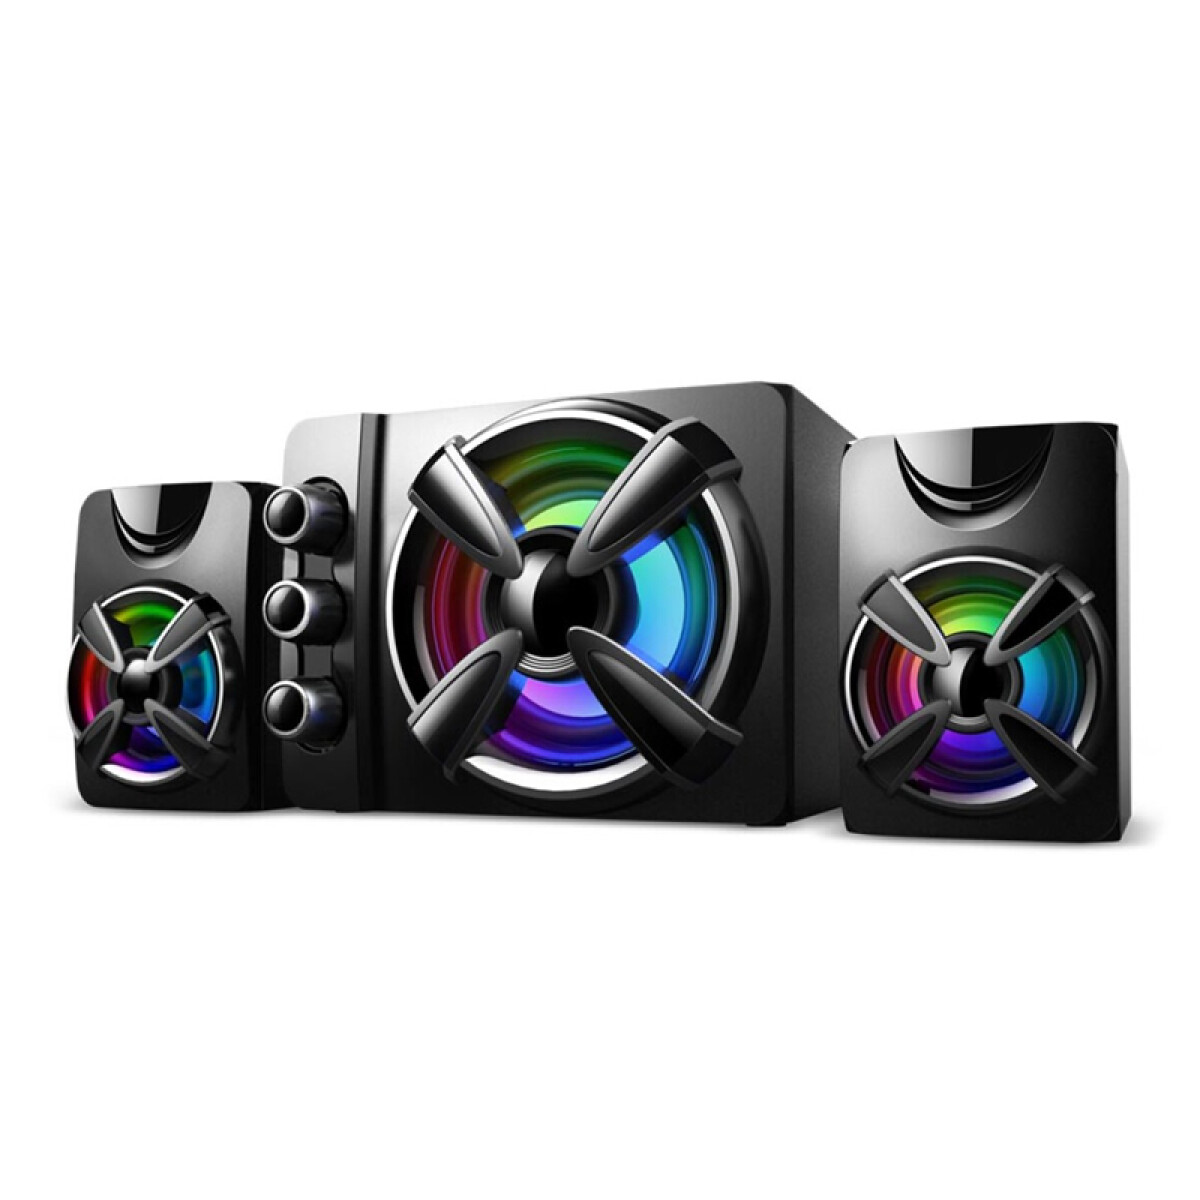 Parlante Gaming 2.1 30W RMS Multilaser SP952 - Unica 